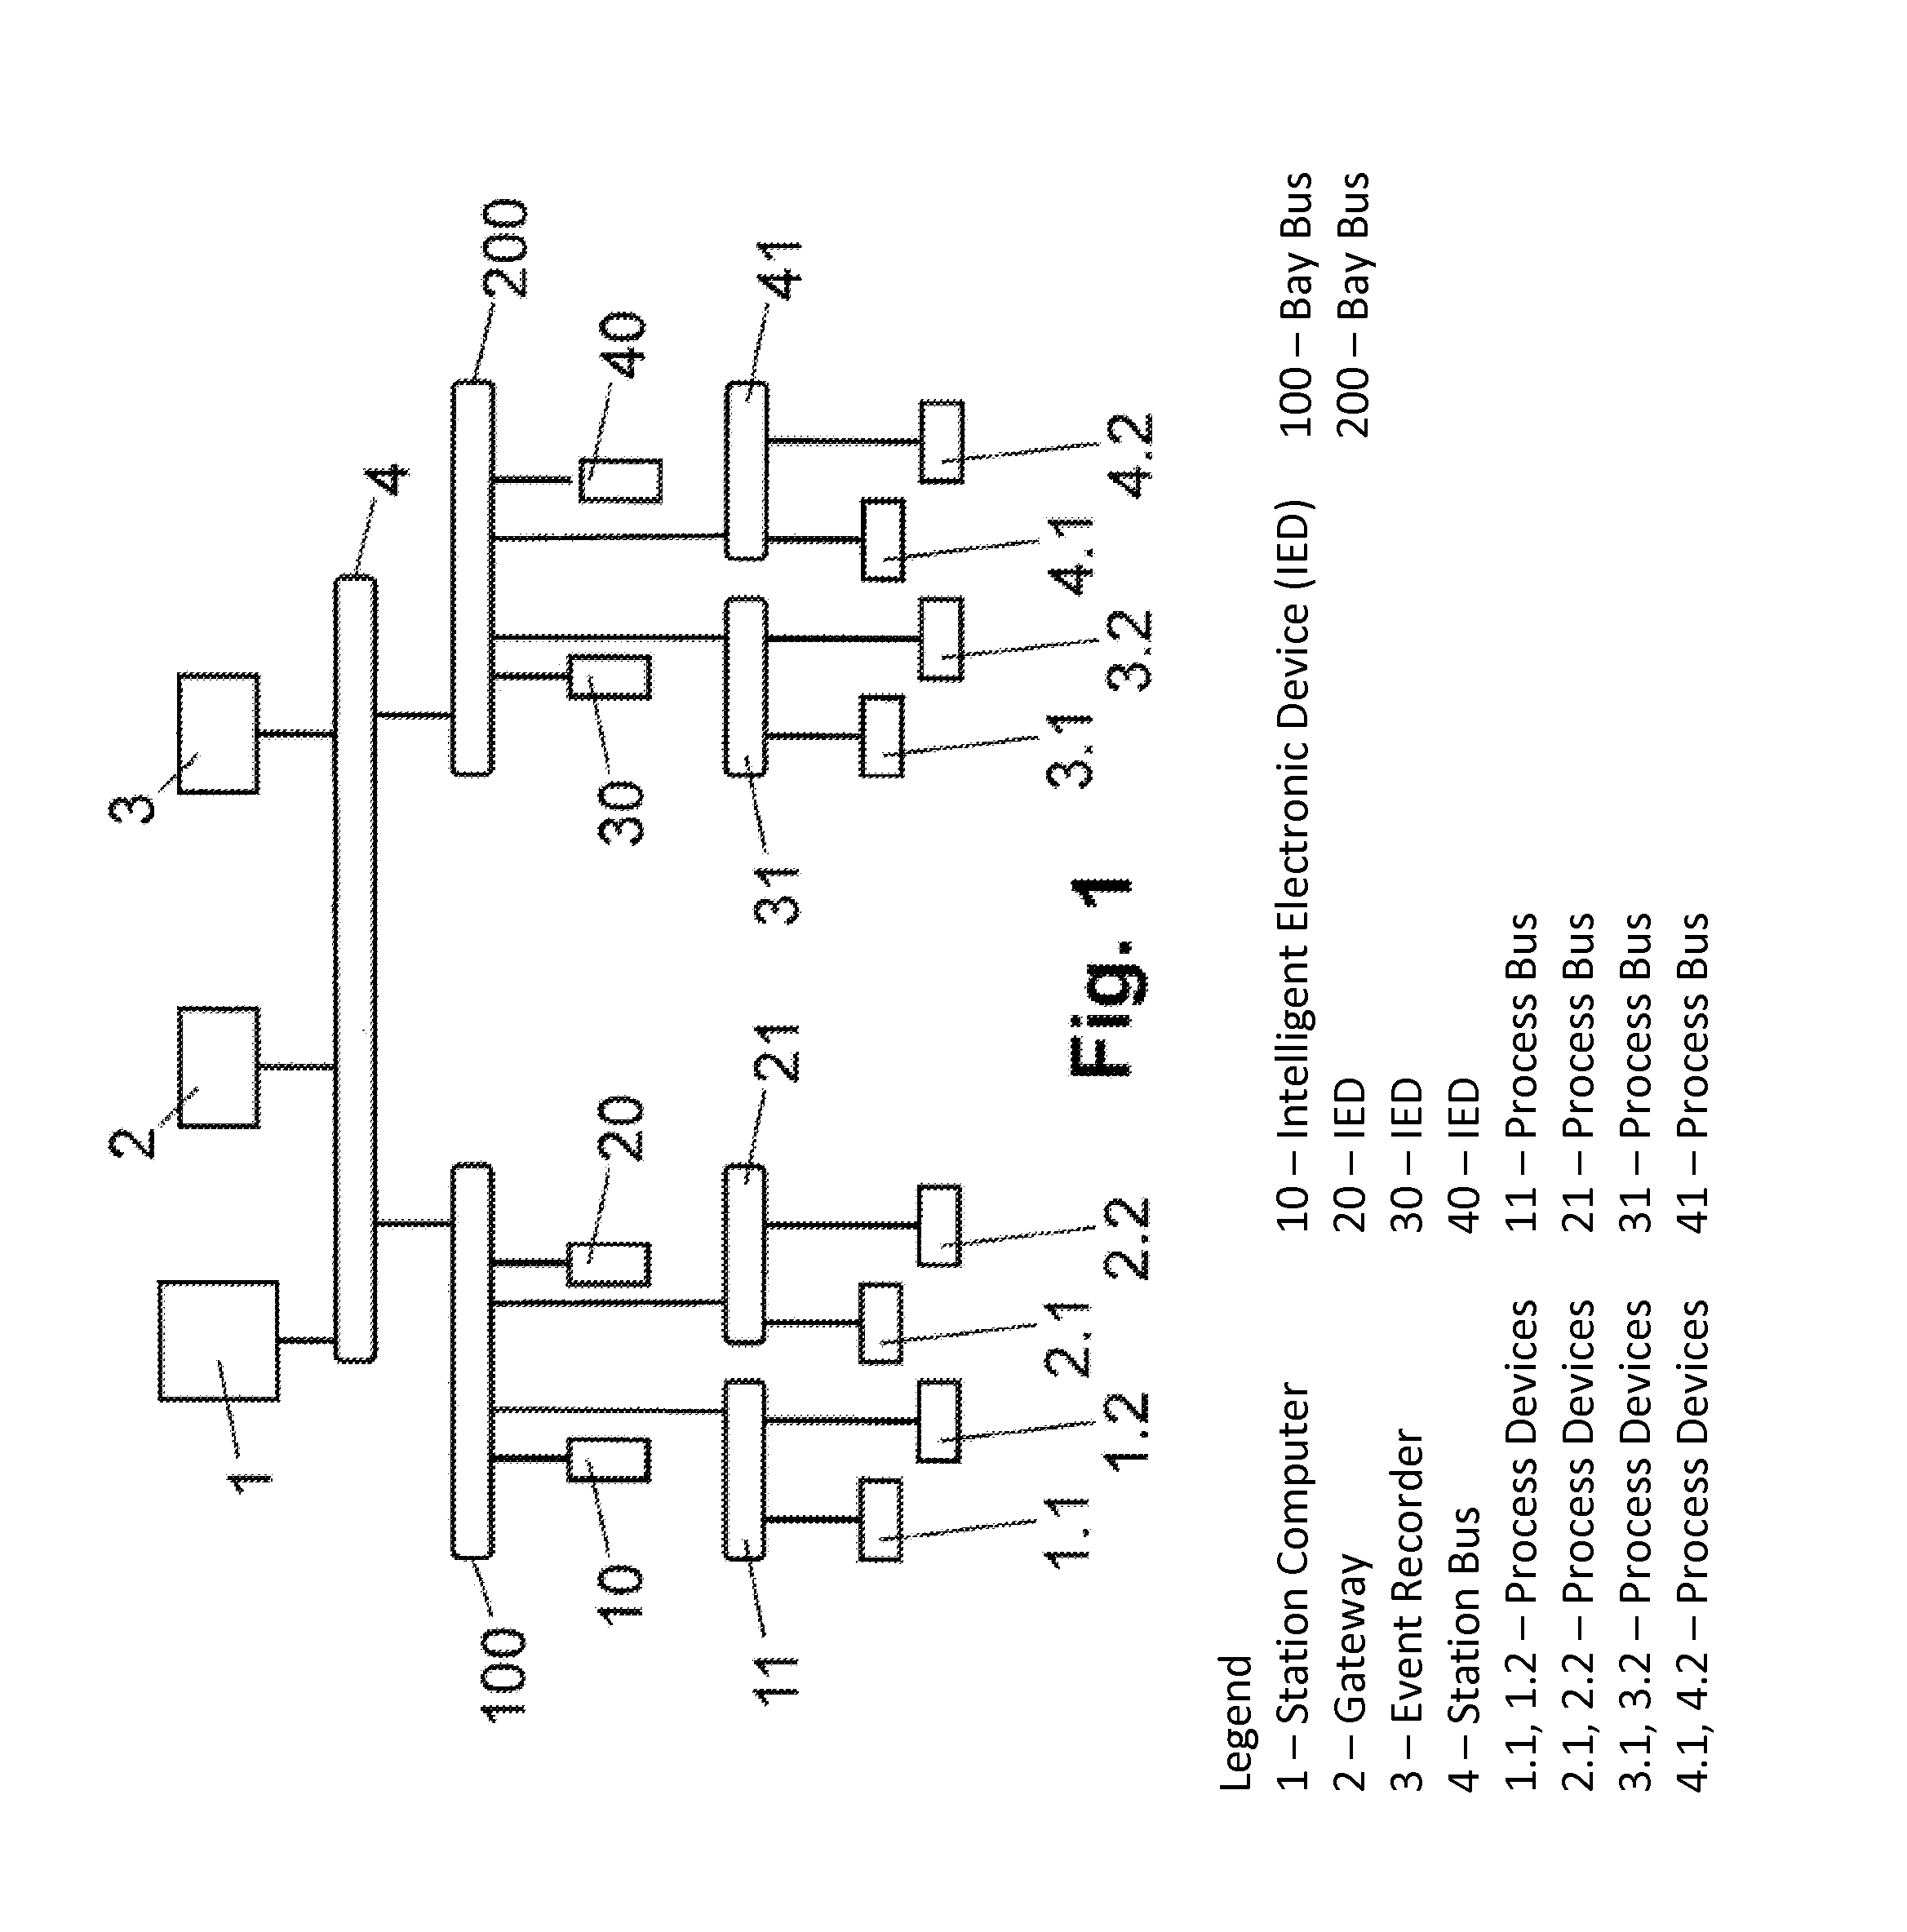 Validating reachability of nodes of a network of an industrial automation and control system